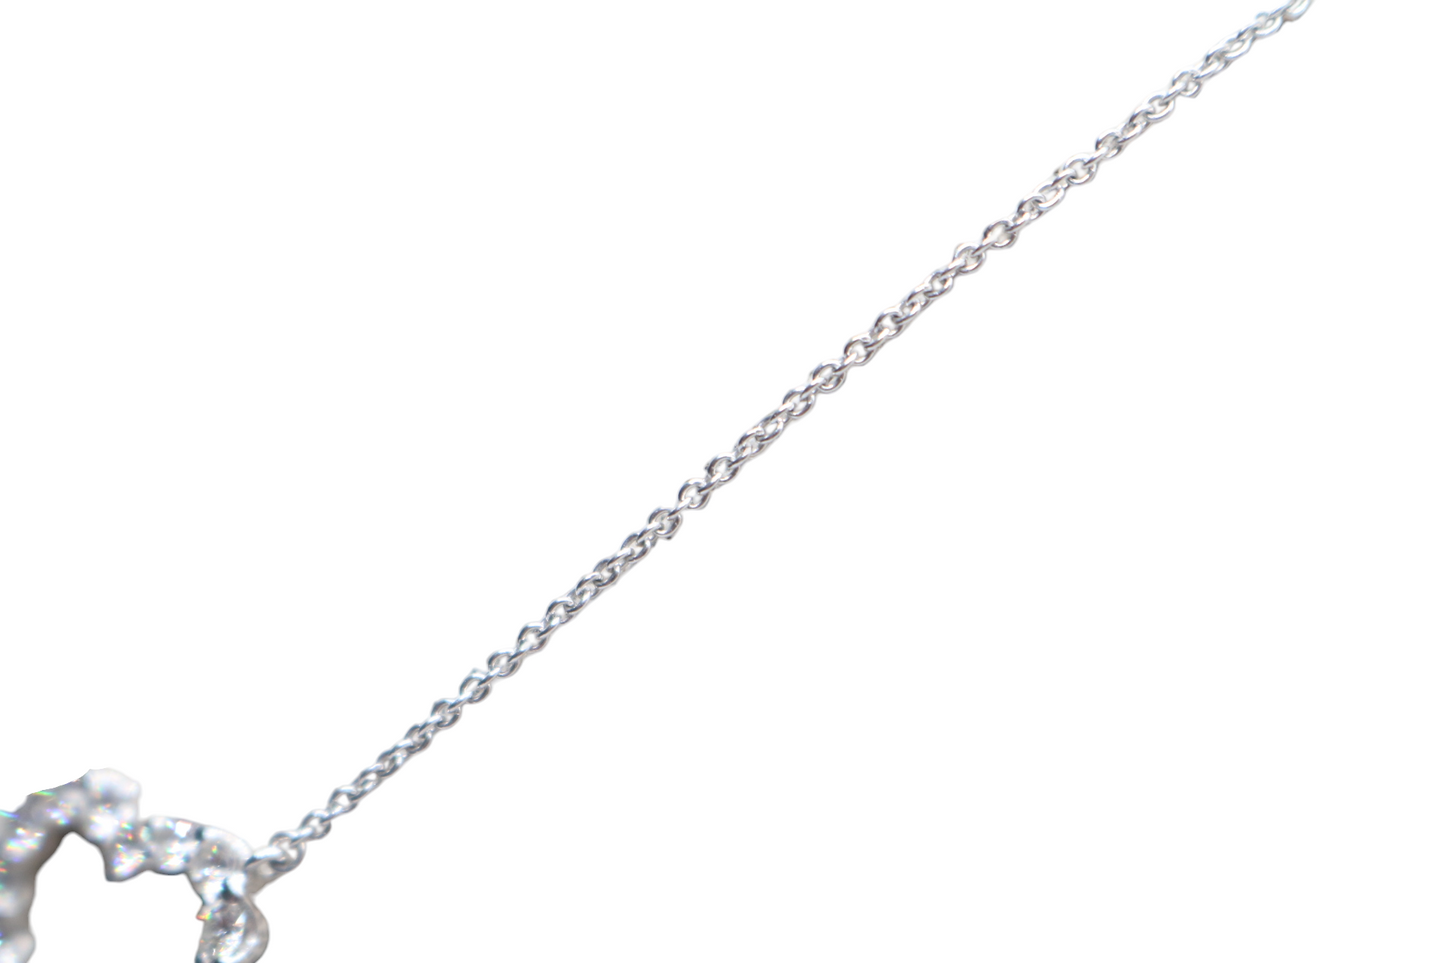 18K White Gold Necklace W/ Diamond Heart Charm (0.80 CTW) (Length 18") (local pick-up only)